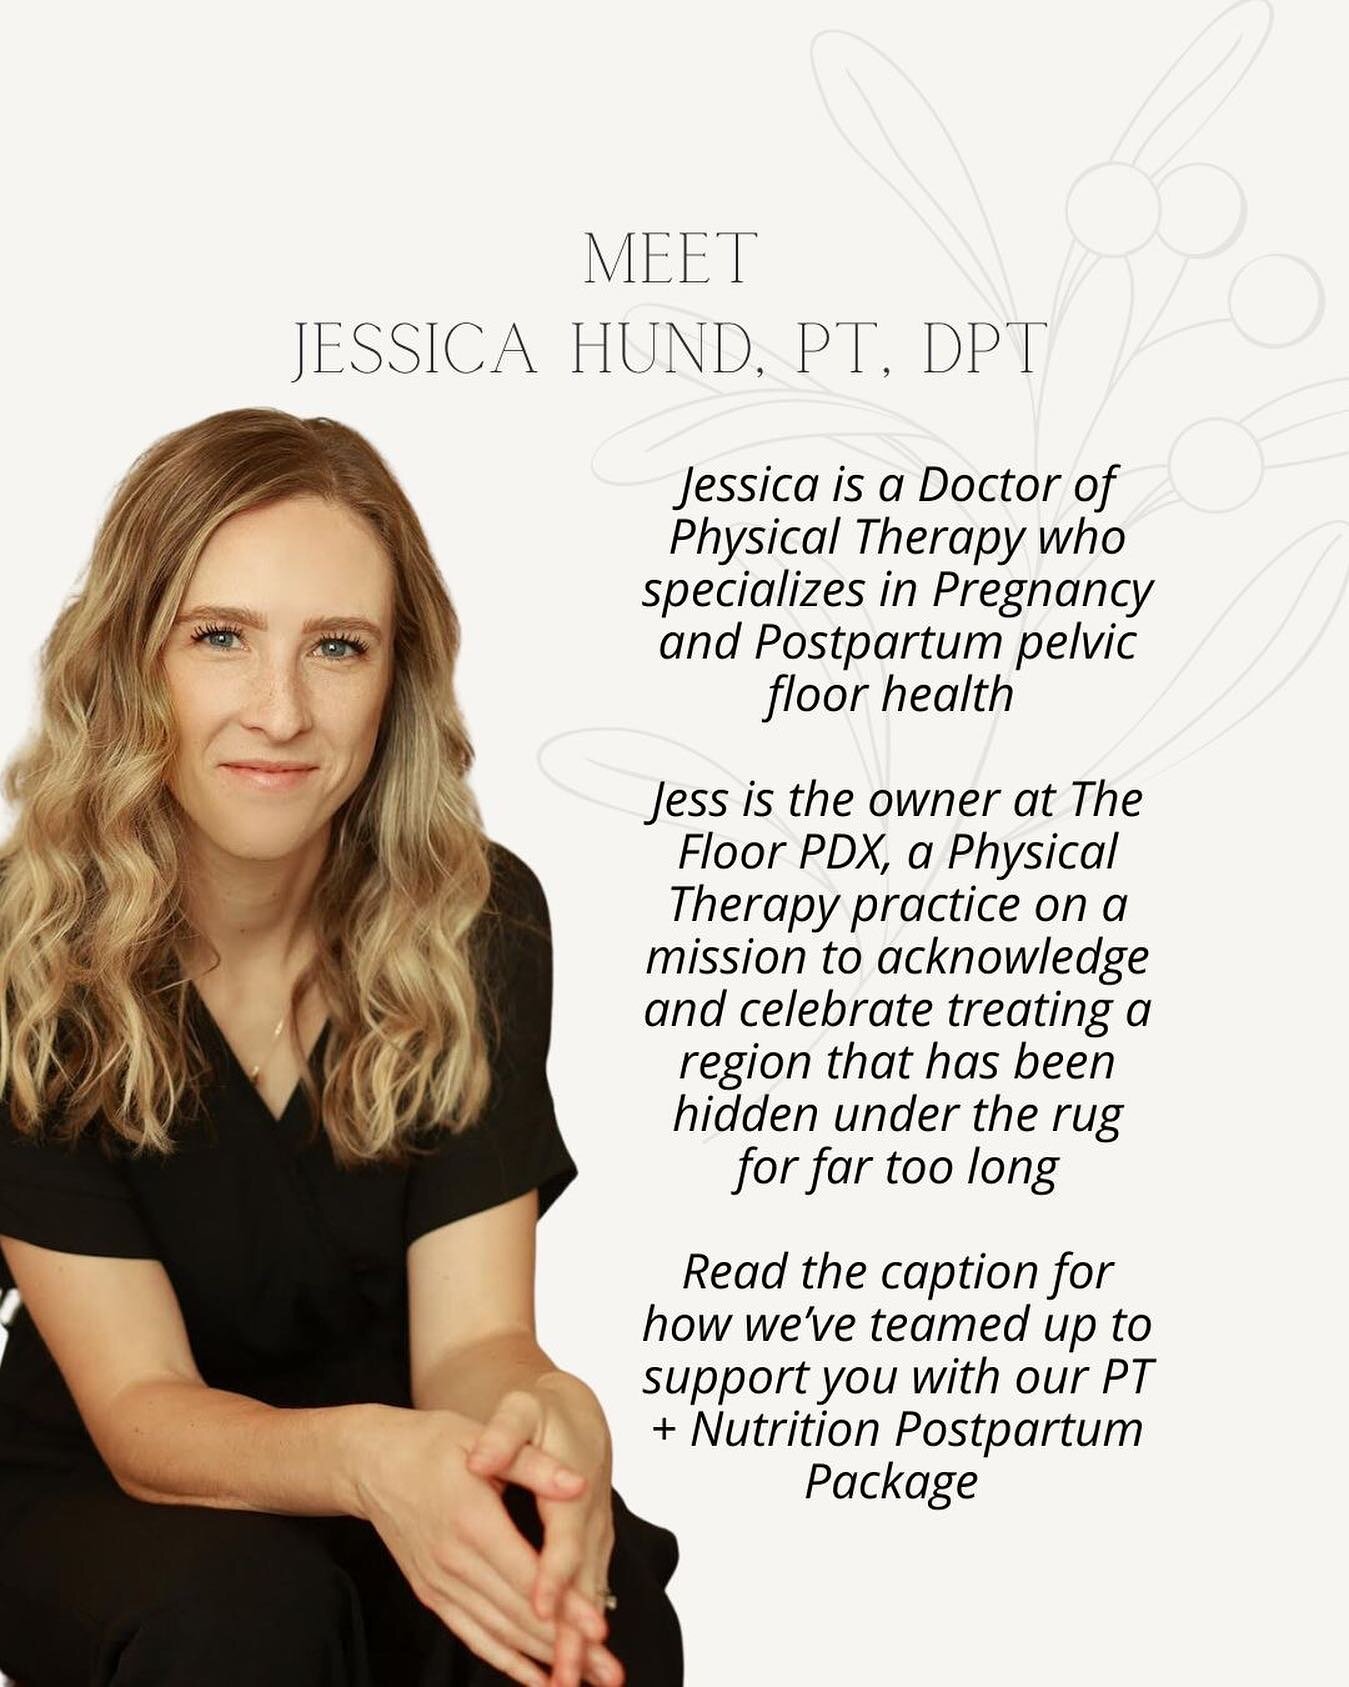 Meet Dr. Hund! 

Jessica is a Doctor of Physical Therapy and a pelvic floor health expert who&rsquo;s teaming up with Nourishment for Generations to support you and your growing family during postpartum. 

And I couldn&rsquo;t be more excited! 🤩

Je